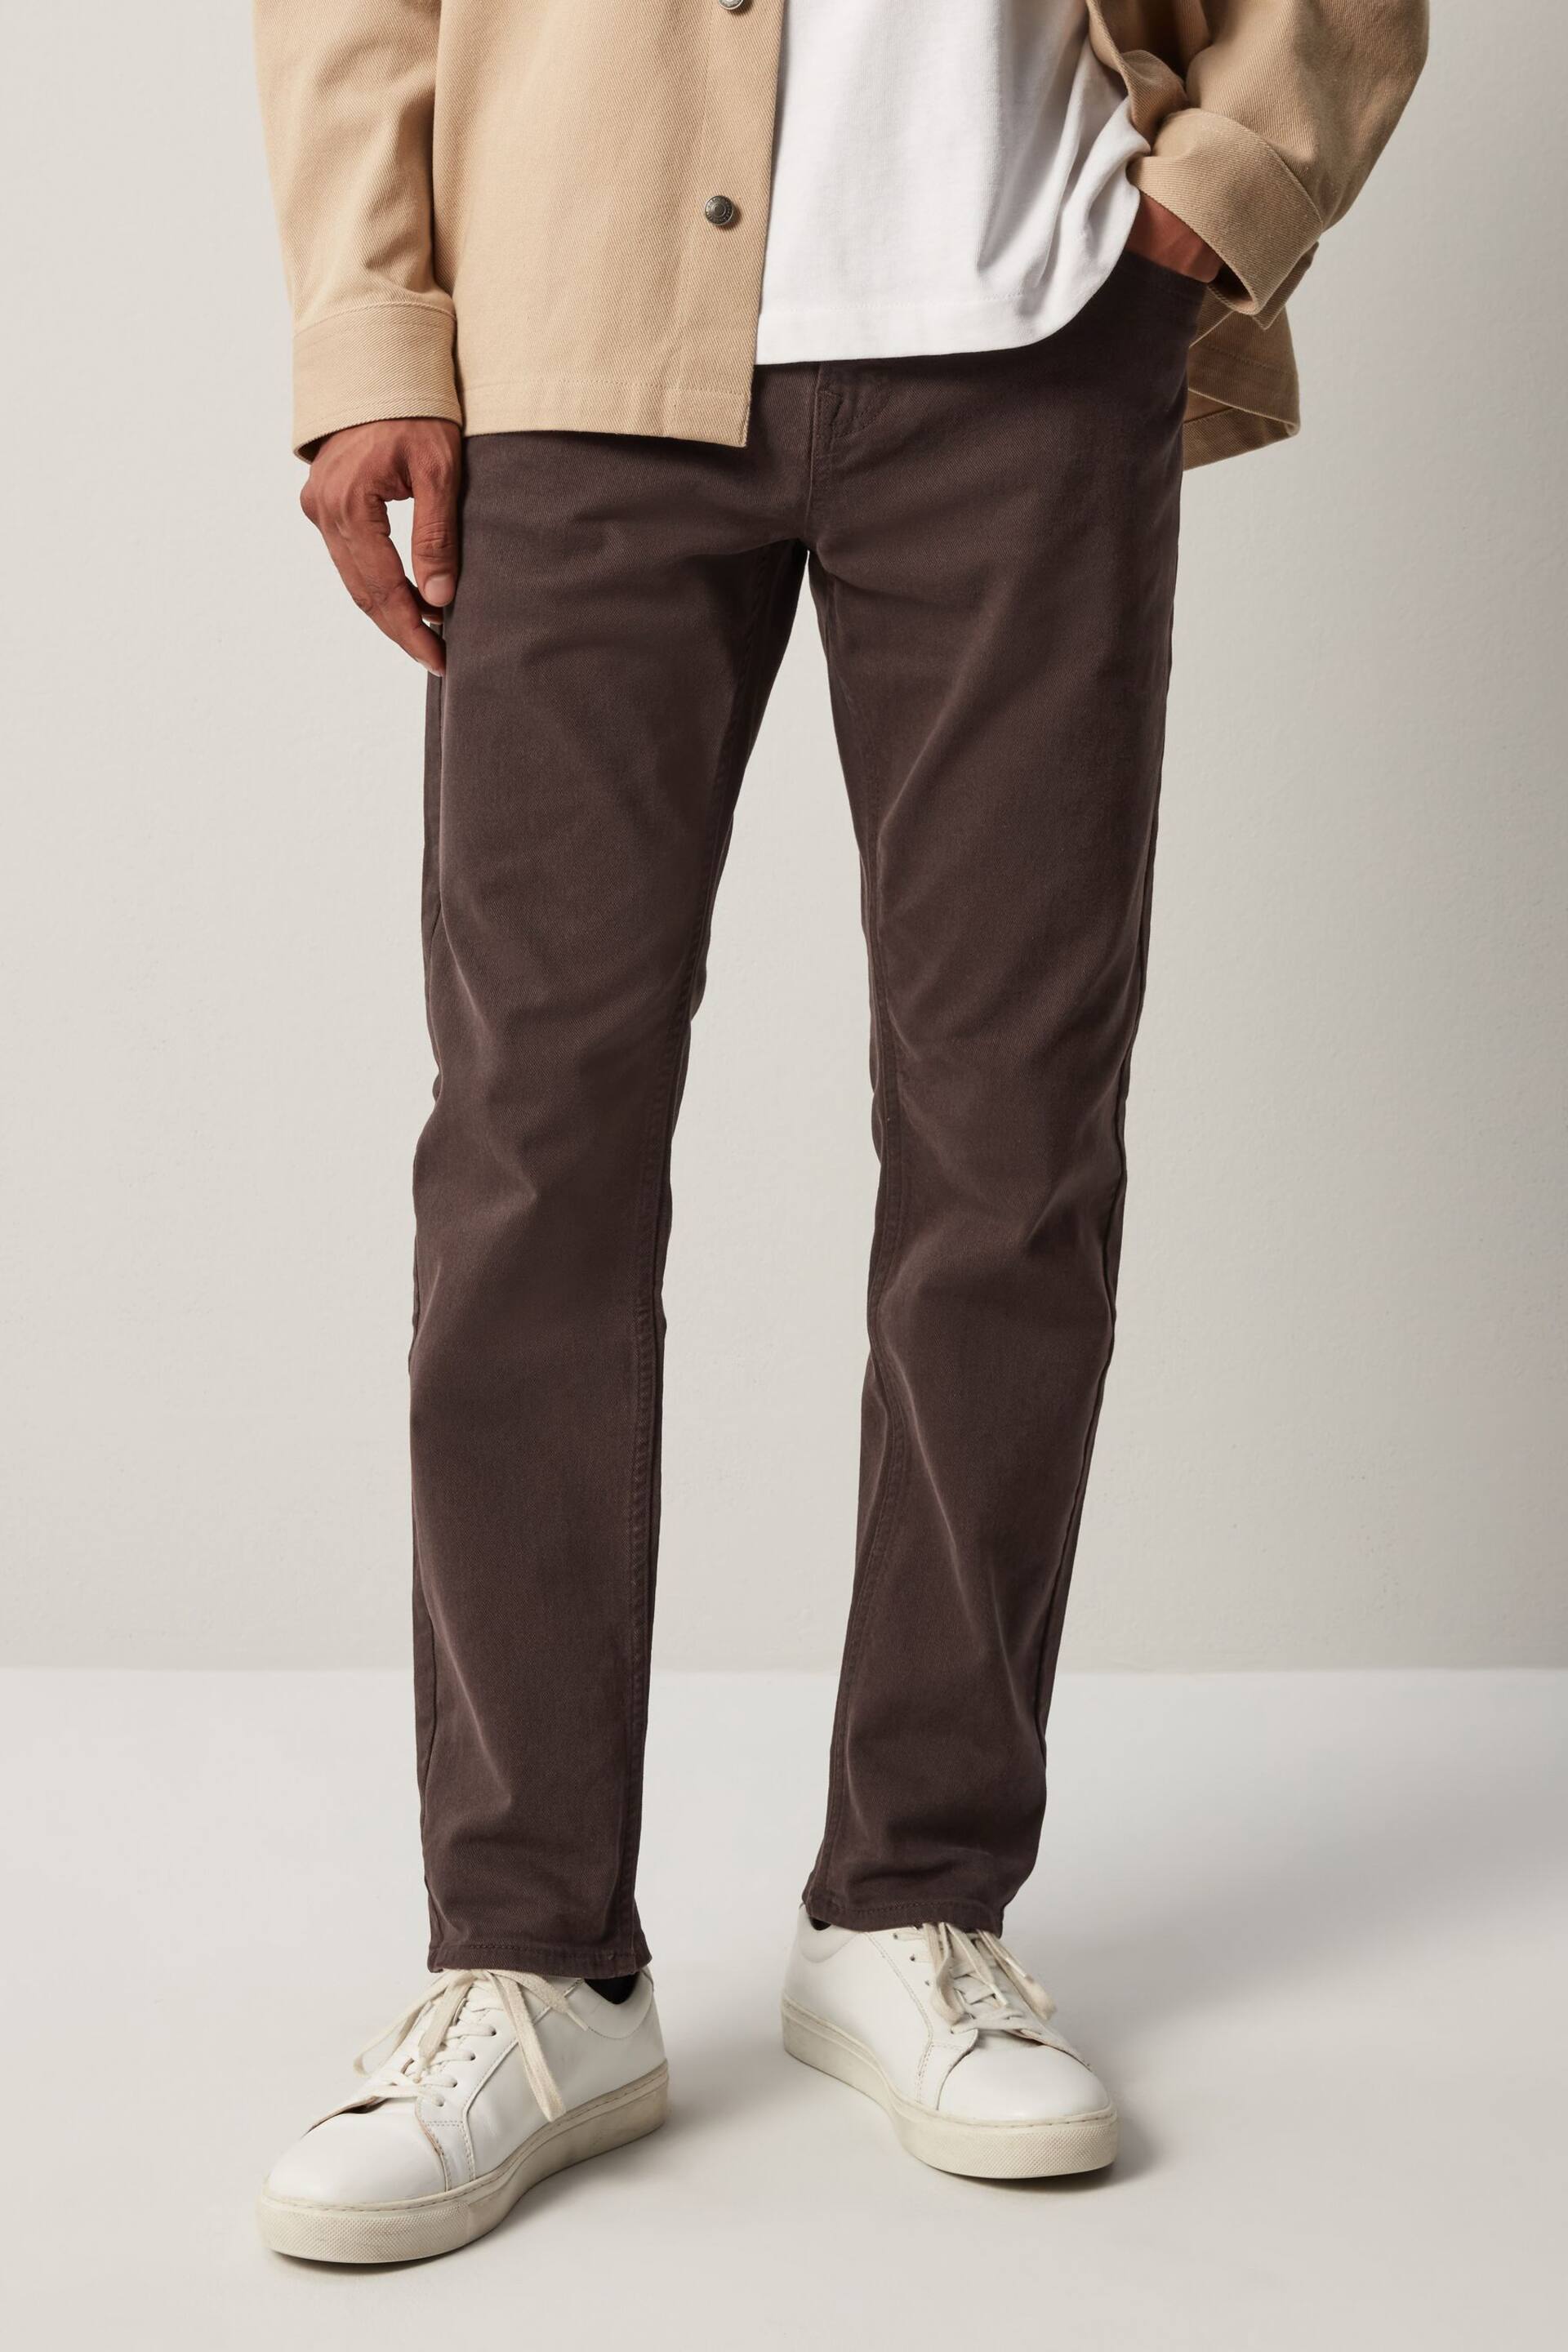 Brown Slim Fit Coloured Stretch Jeans - Image 1 of 7